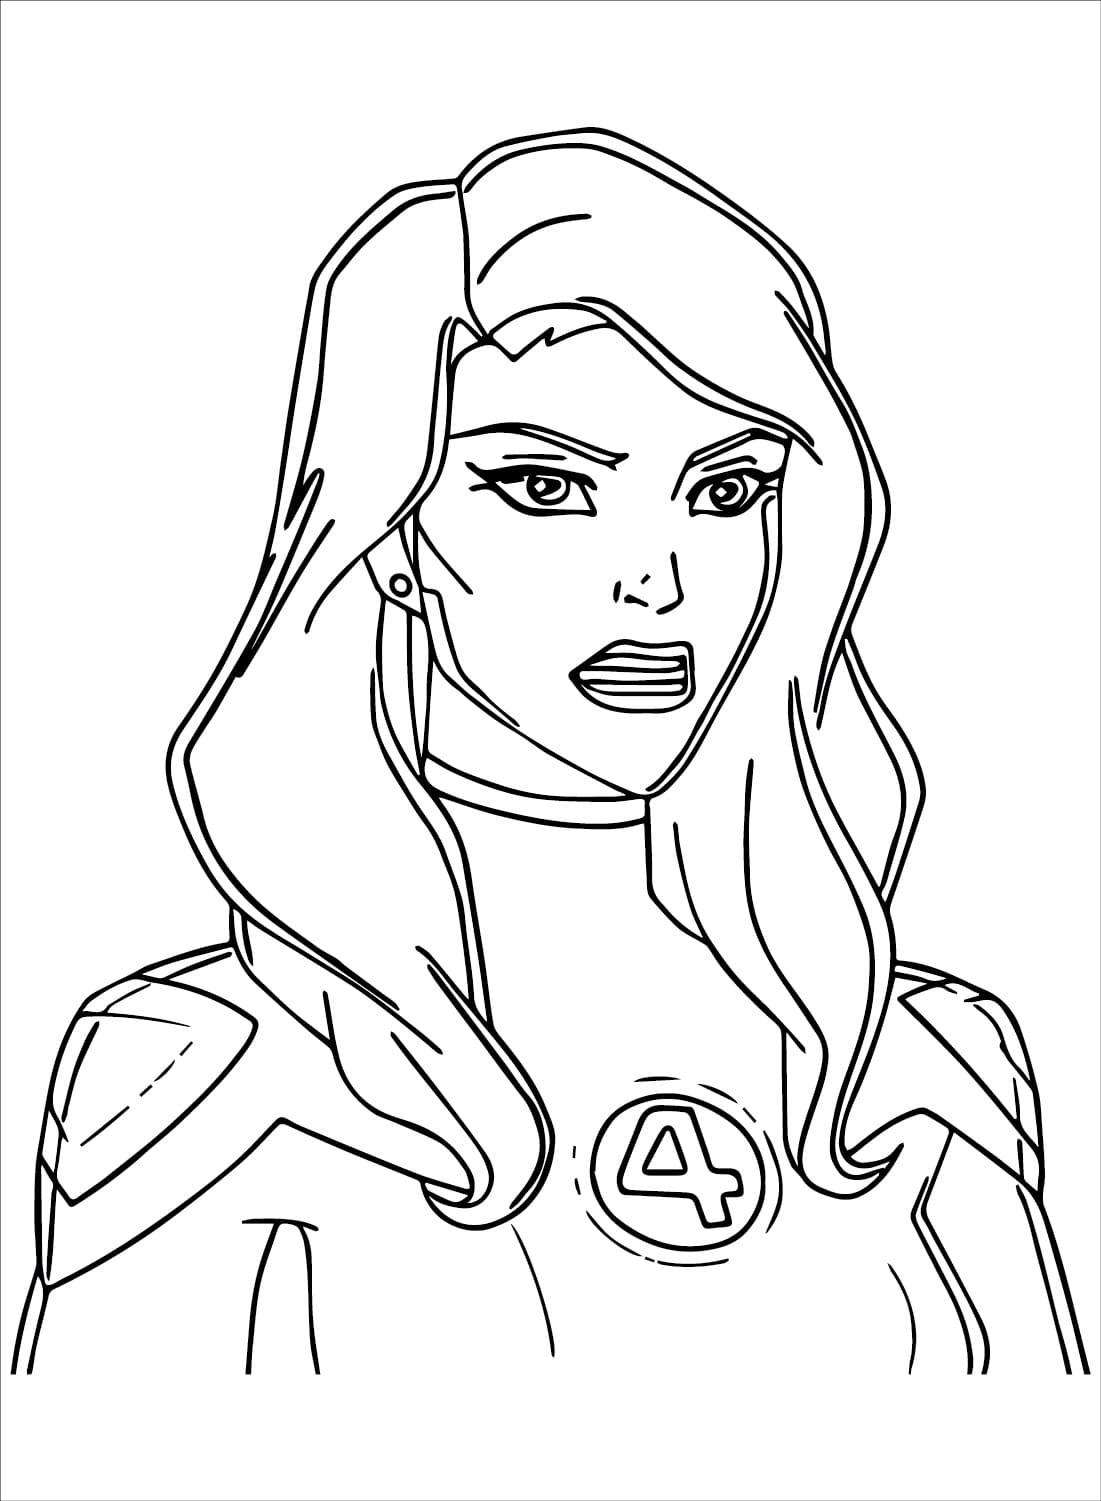 Invisible Woman Face coloring page - Download, Print or Color Online ...